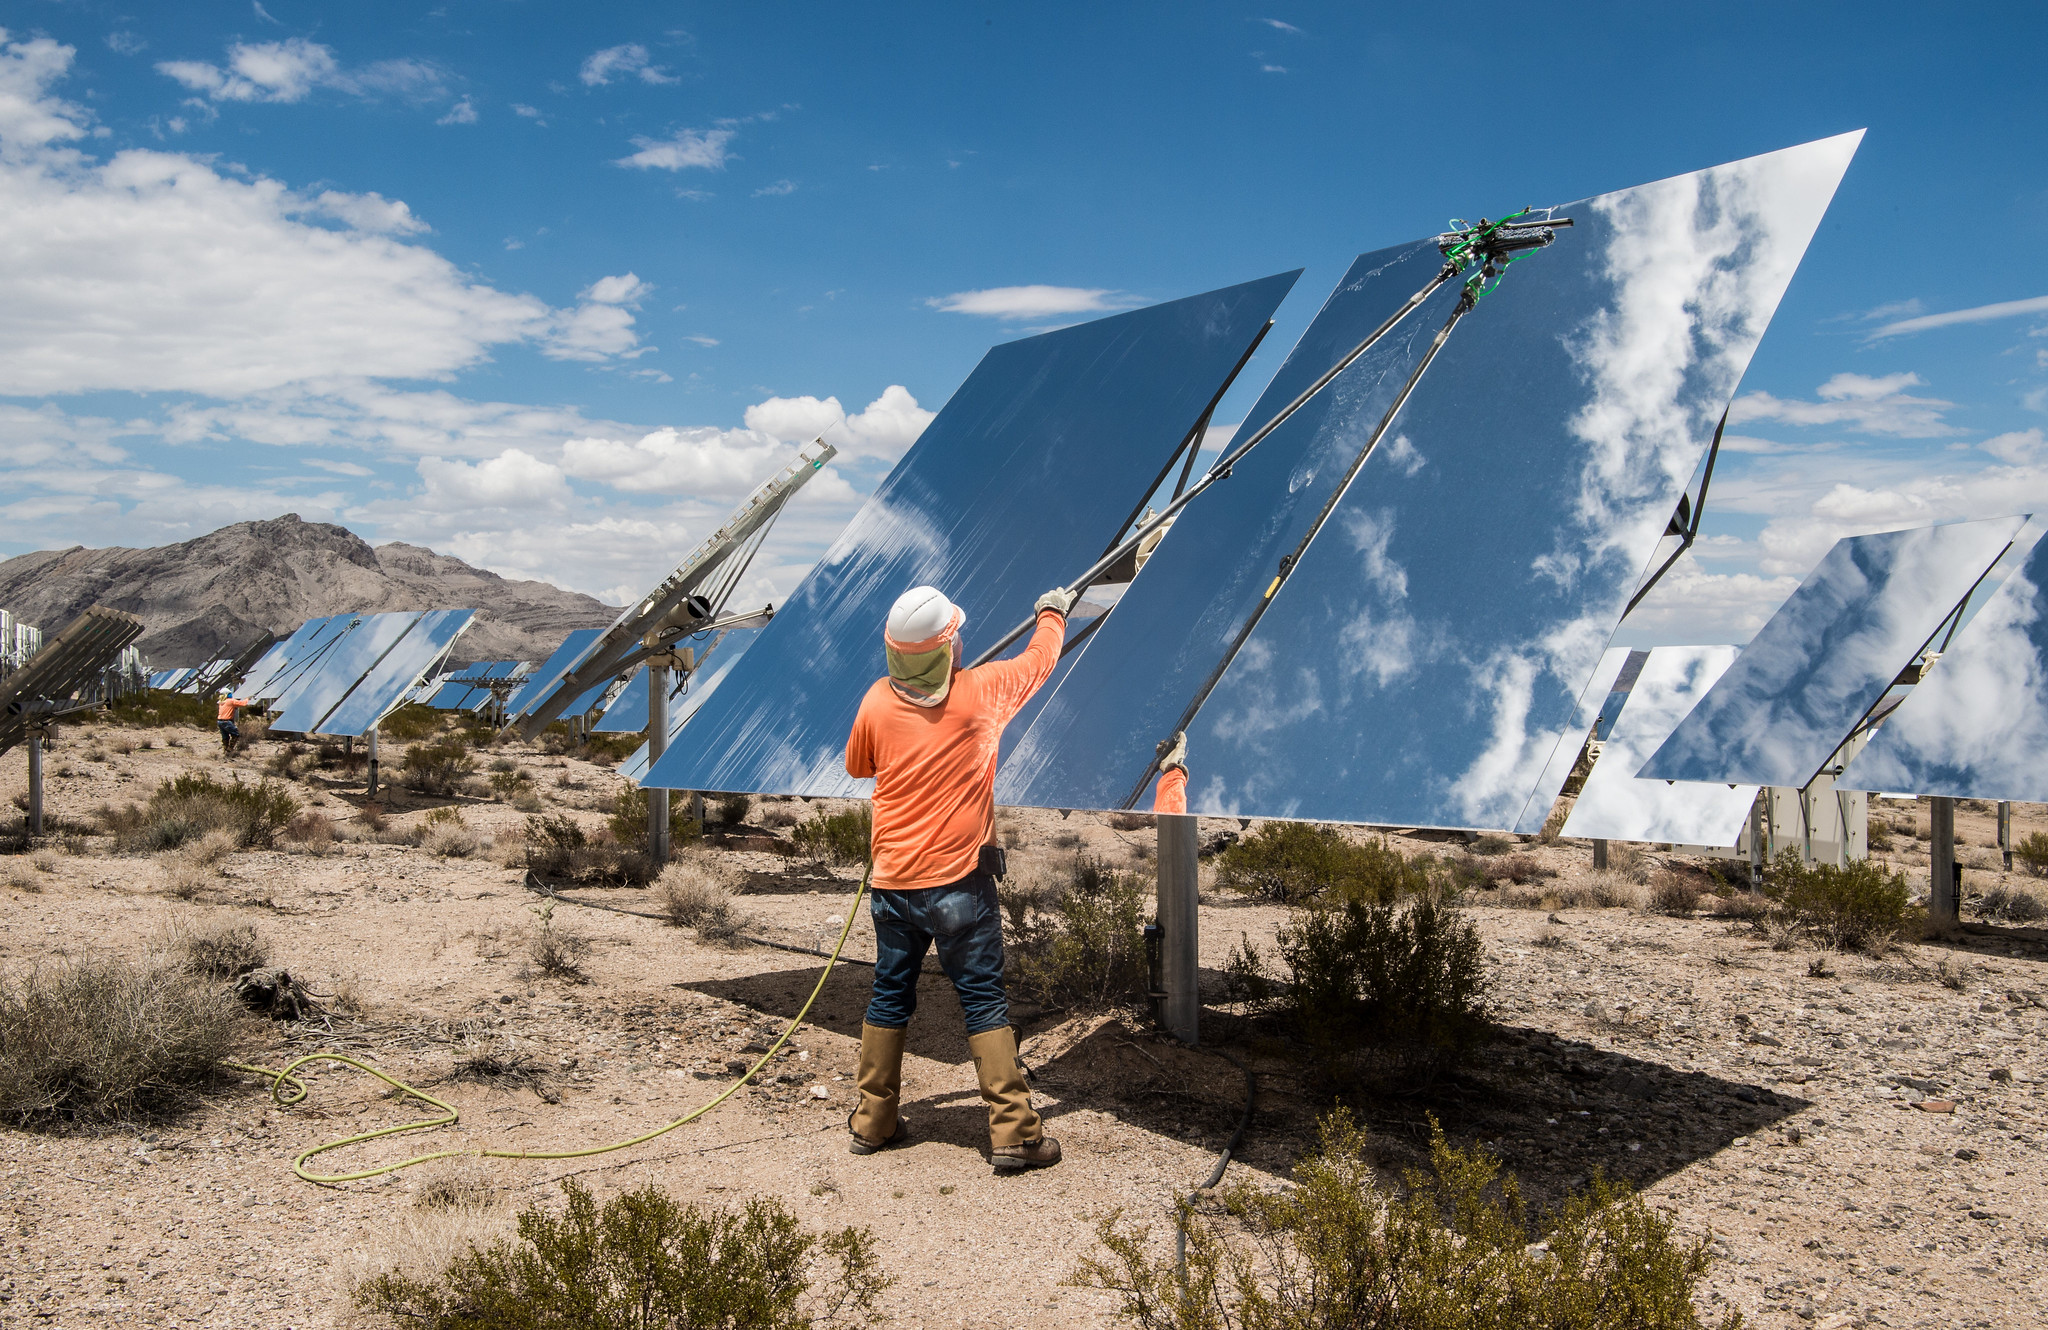 Contracted workers clean Heliostats at the Ivanpah Solar Project, owned by NRG Energy, Bright Source Energy,Bechtel and Google